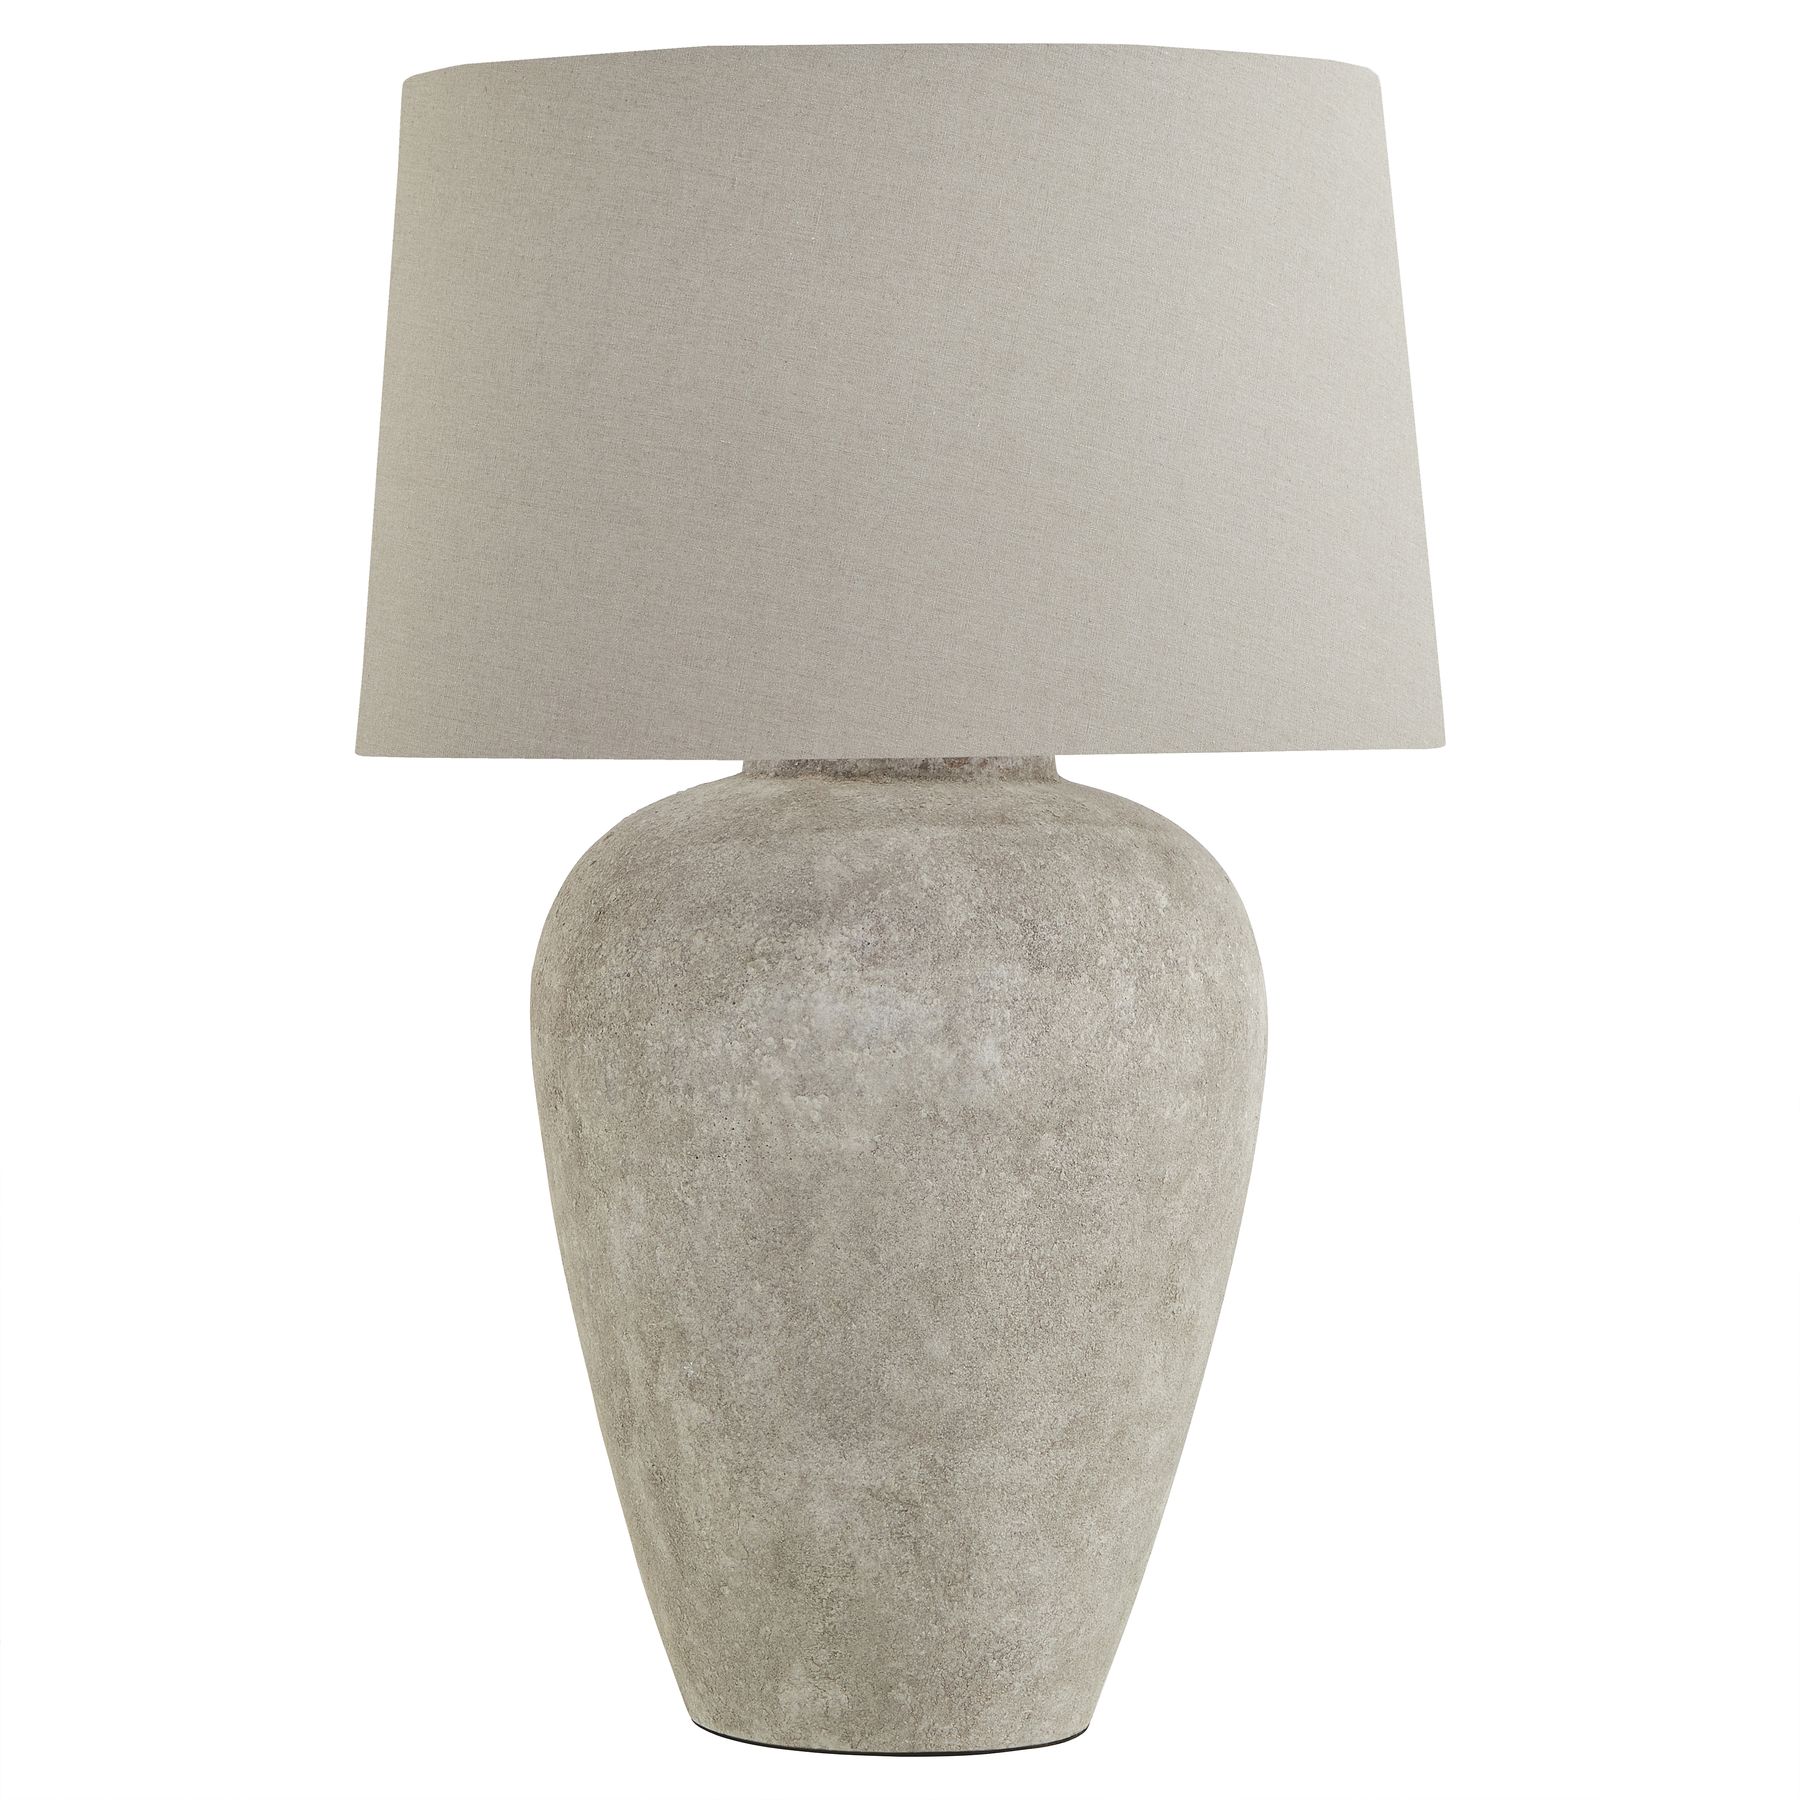 Athena Aged Stone Tall Table Lamp With Linen Shade - Image 1